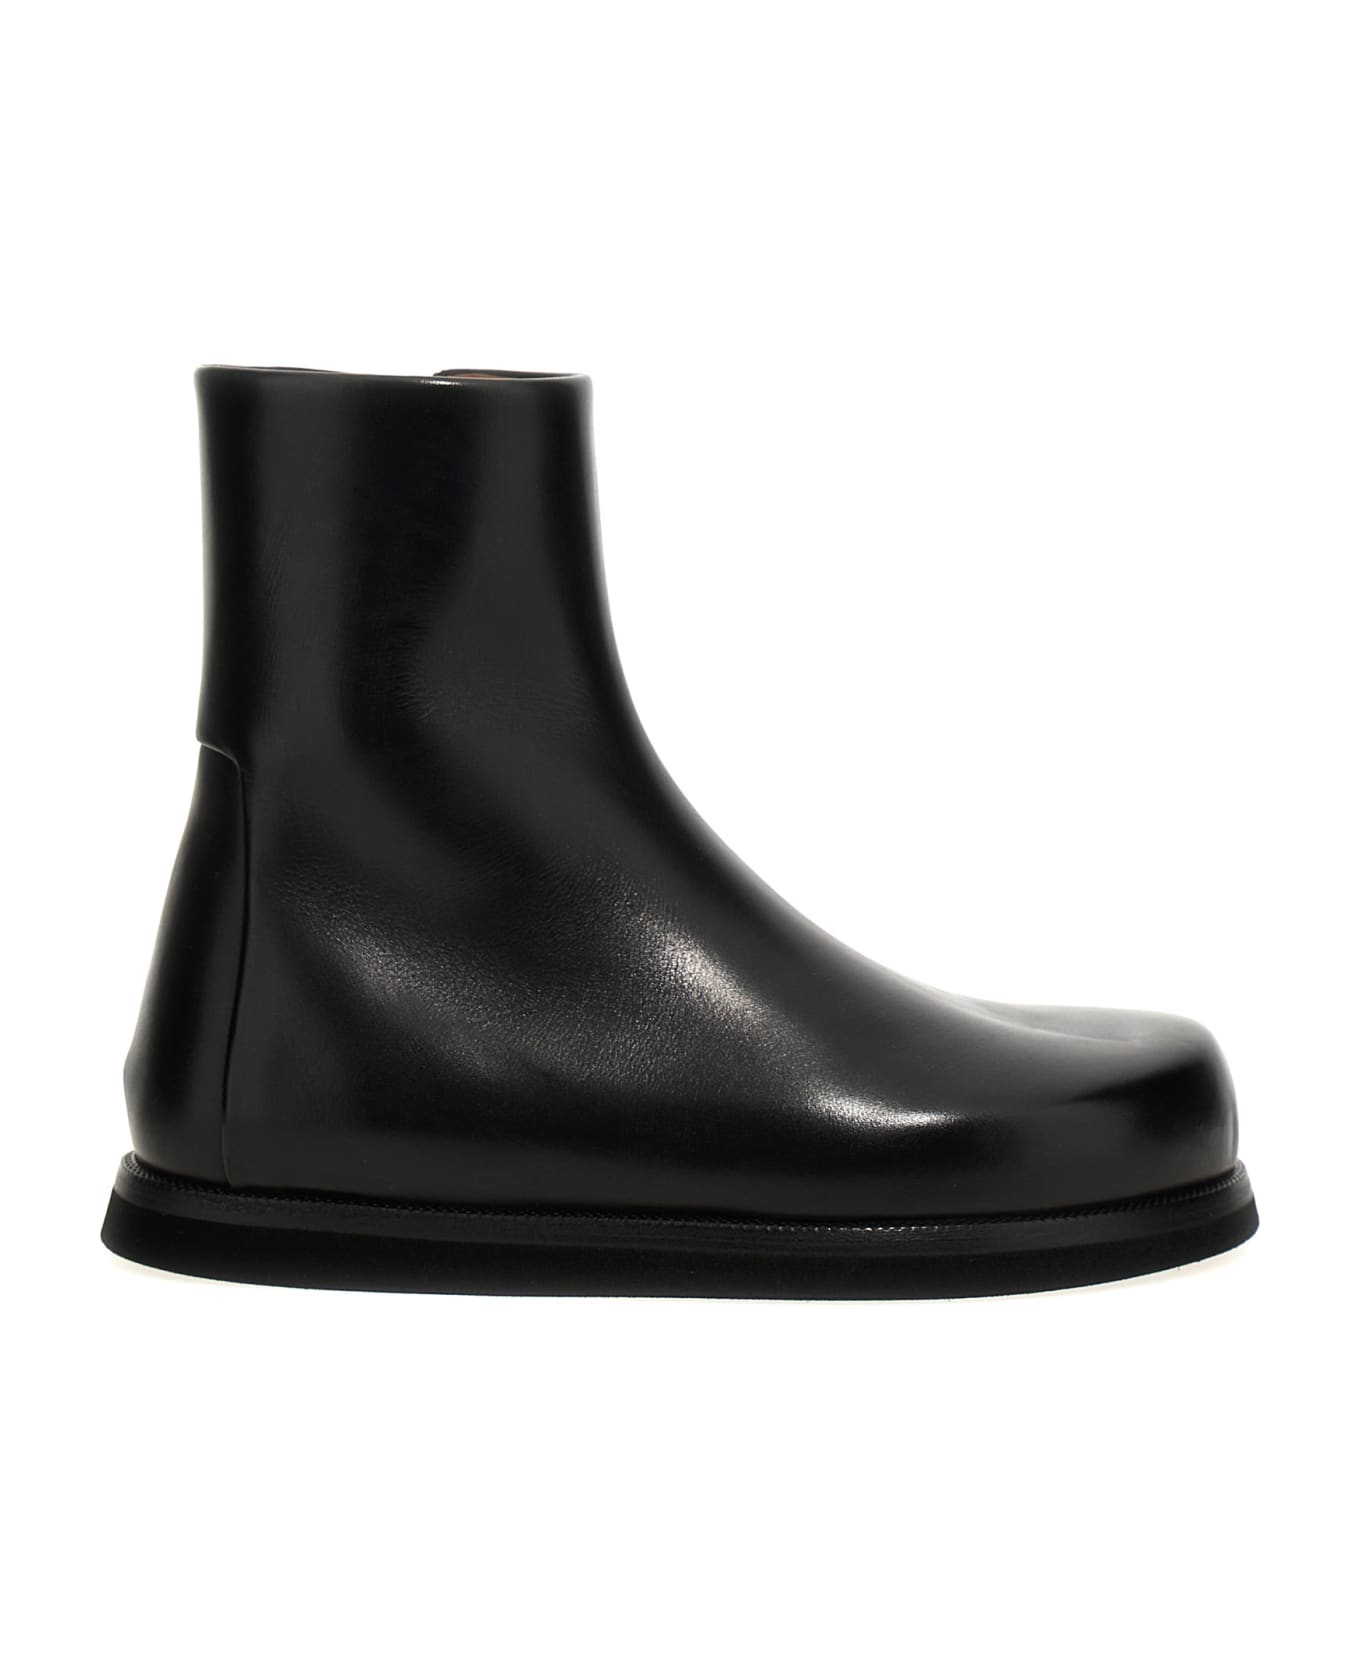 Marsell 'accom' Ankle Boots - Black   ブーツ